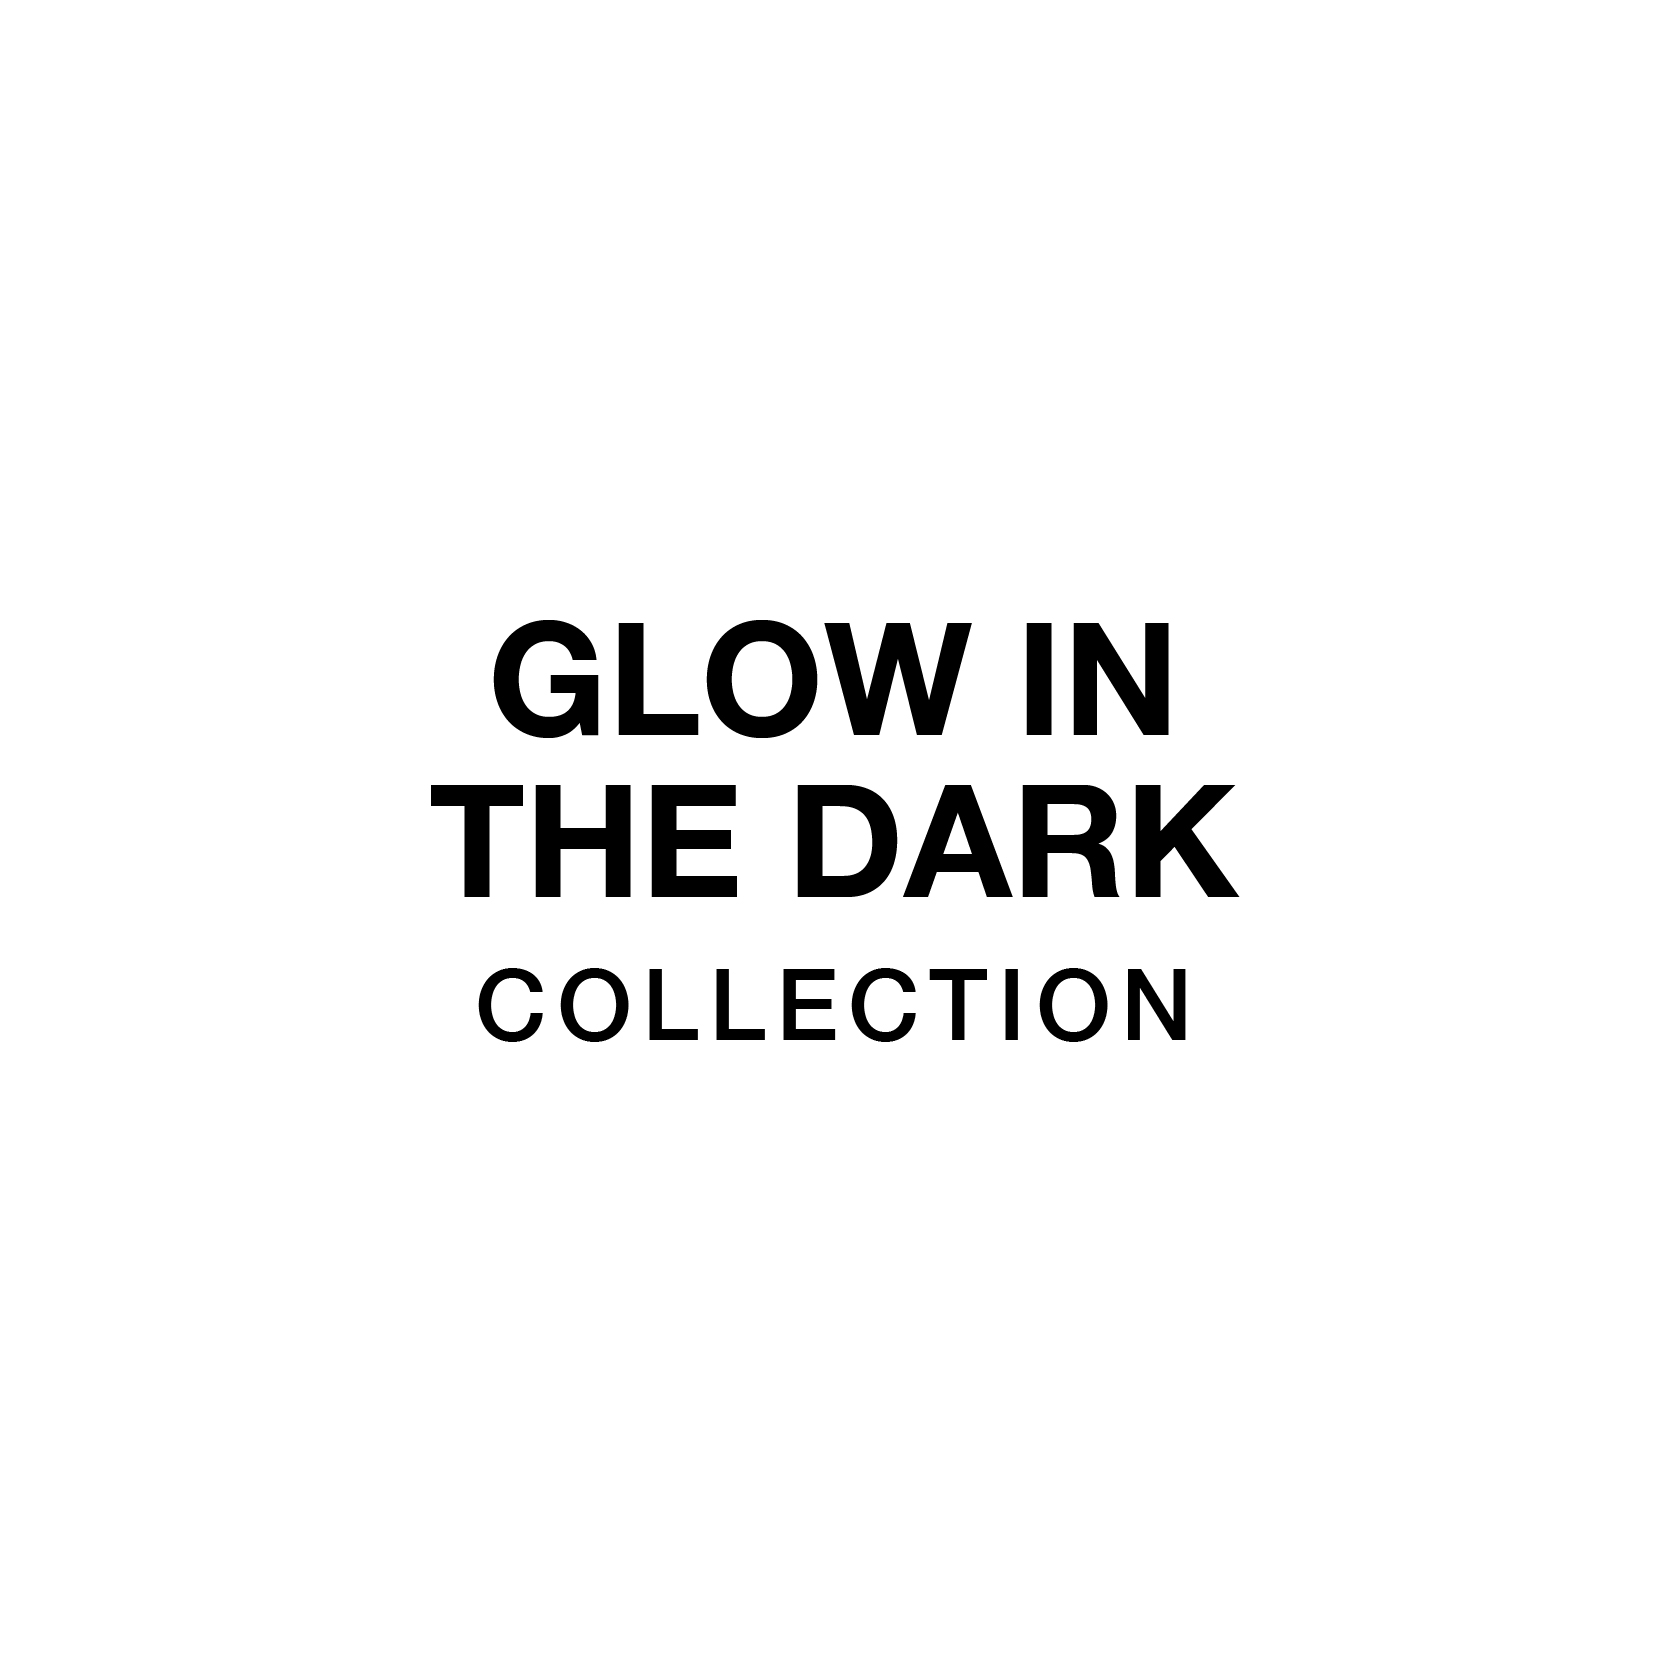 GLOW IN THE DARK Collection